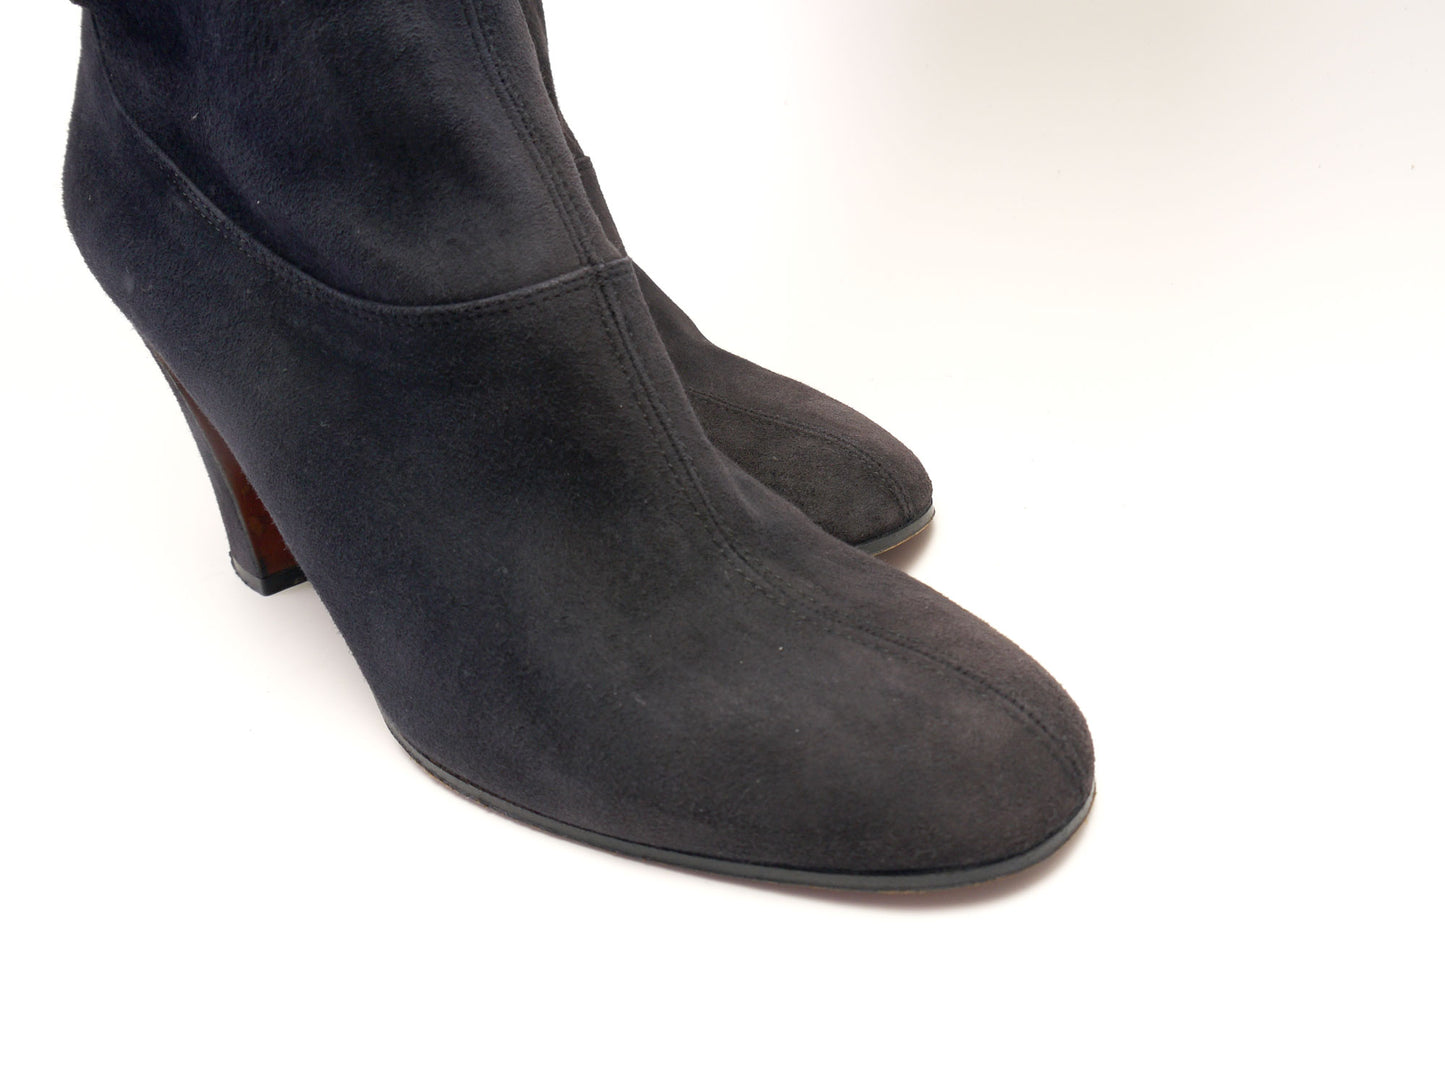 Slate Blue Stretch Suede 1970s Knee Boots by Ferragamo UK 4.5